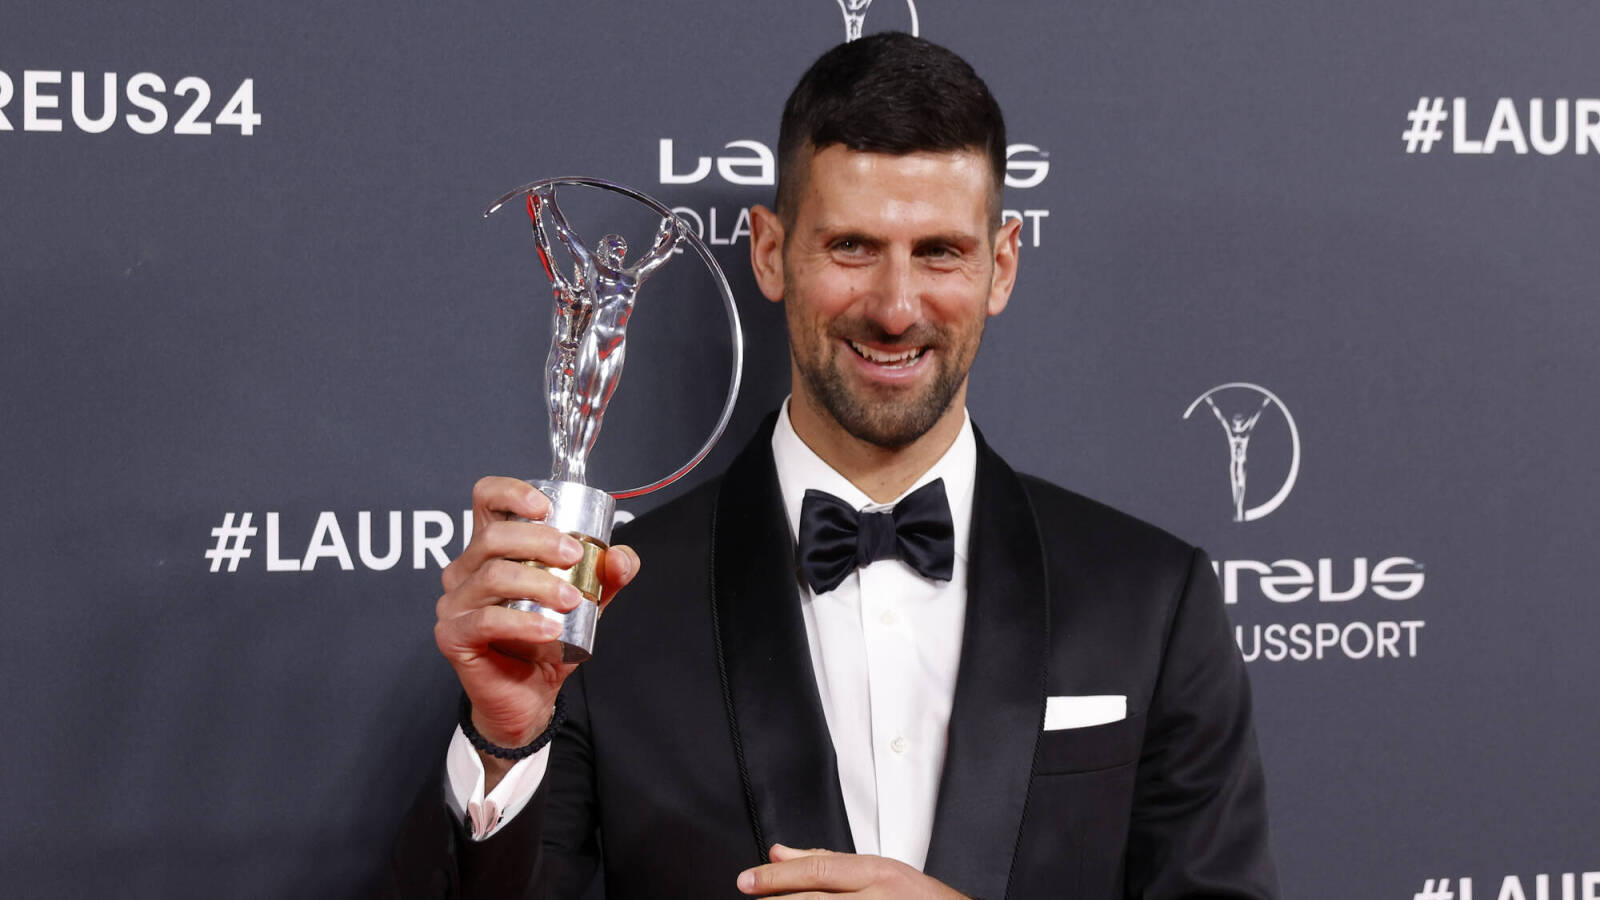 Watch: 'Isn’t it obvious?' Novak Djokovic reveals he would prefer being next James Bond as ‘acting’ career needs a new challenge